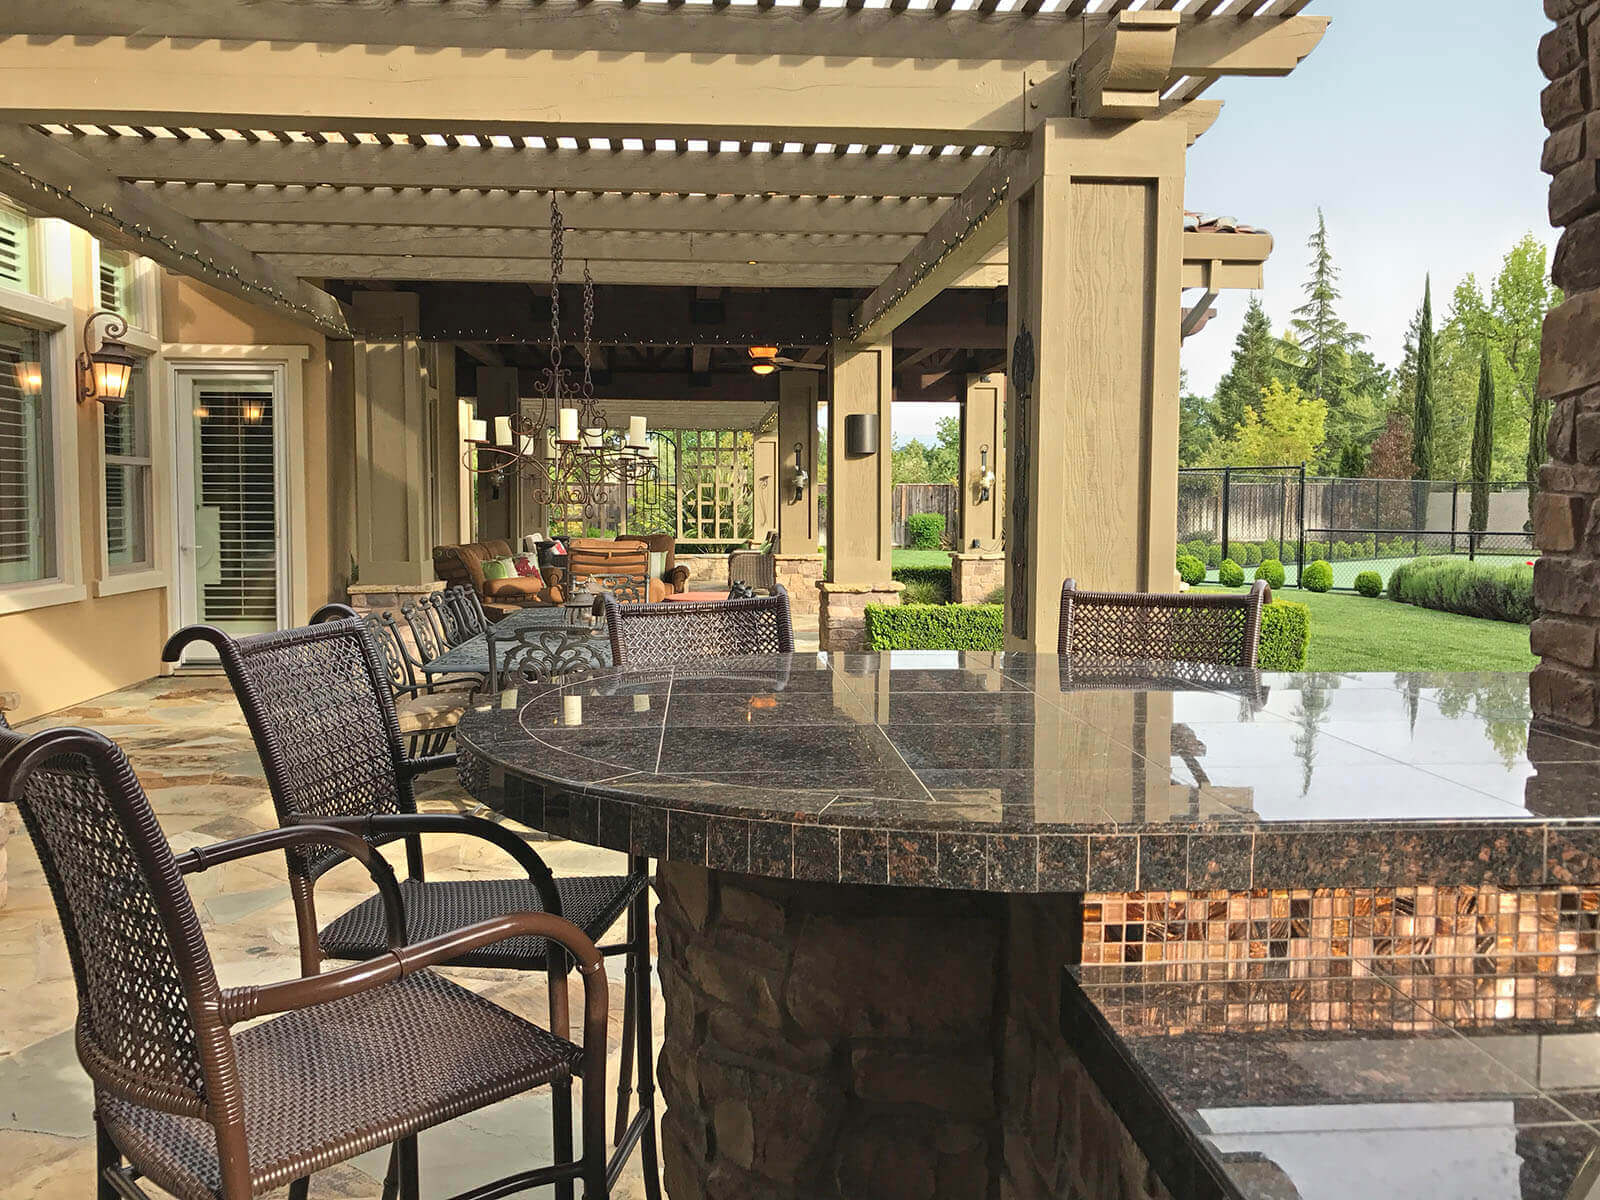 Outdoor dining area with black granite table, pergola-covered lounge, and manicured lawn